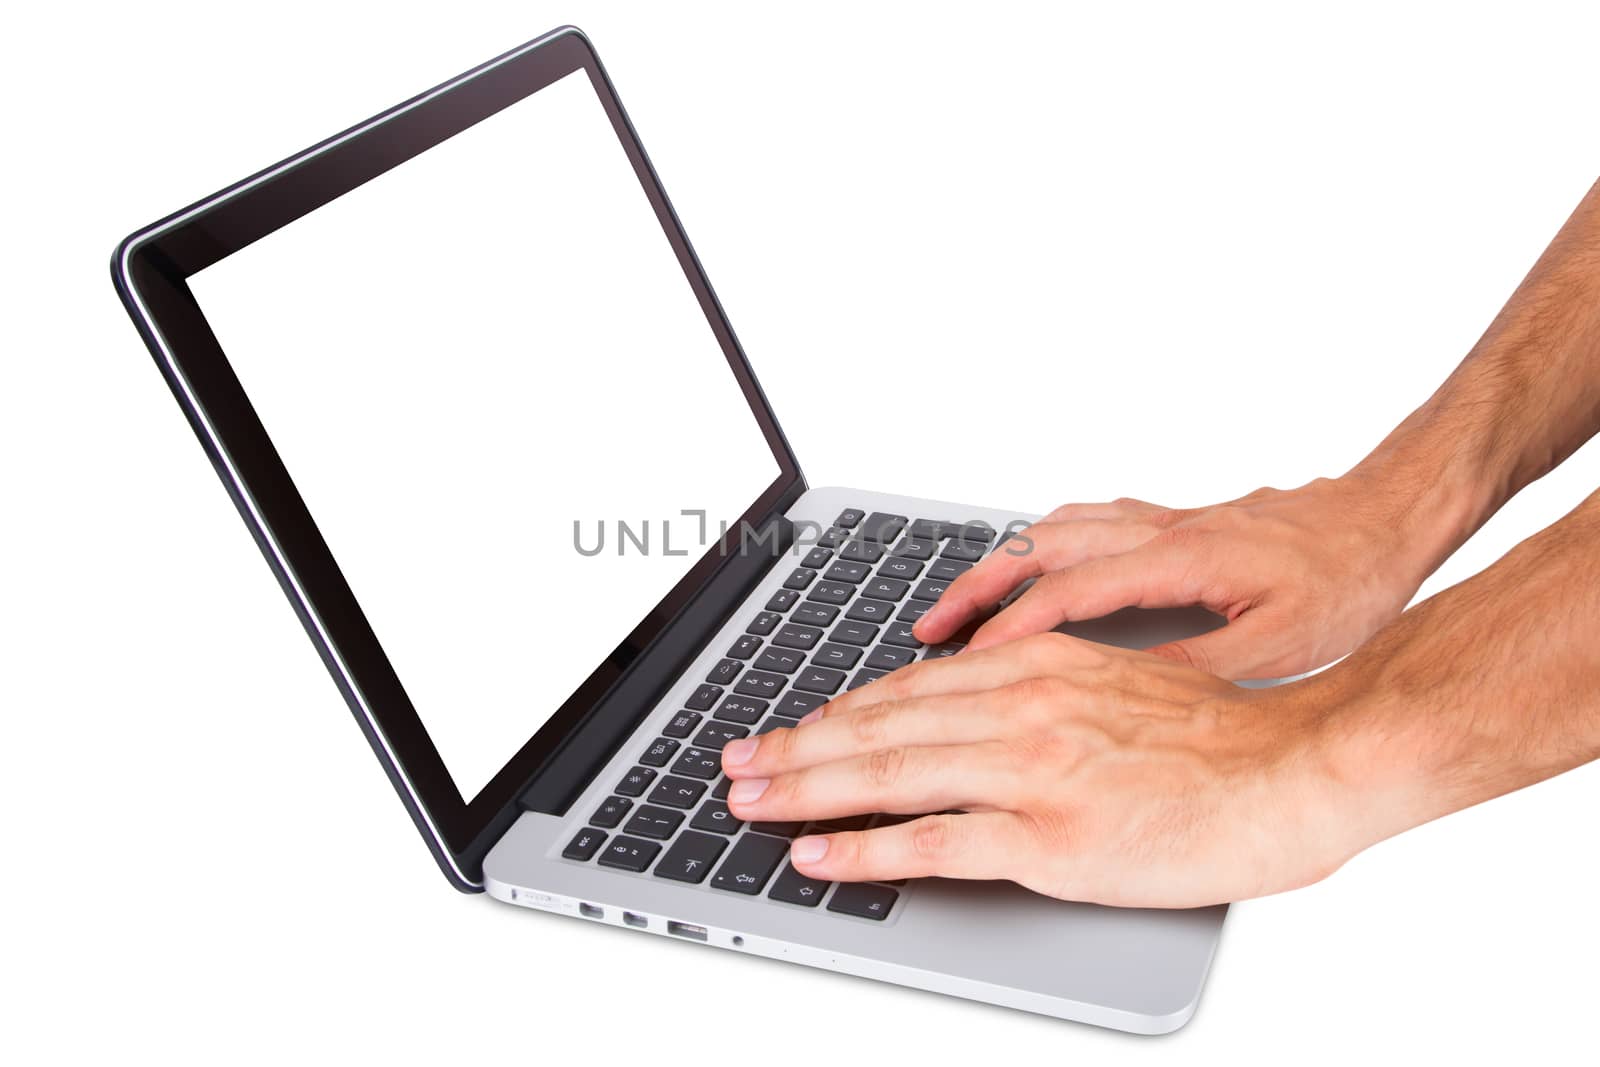 Male hands using laptop with blank, empty screen, isolated on white background.